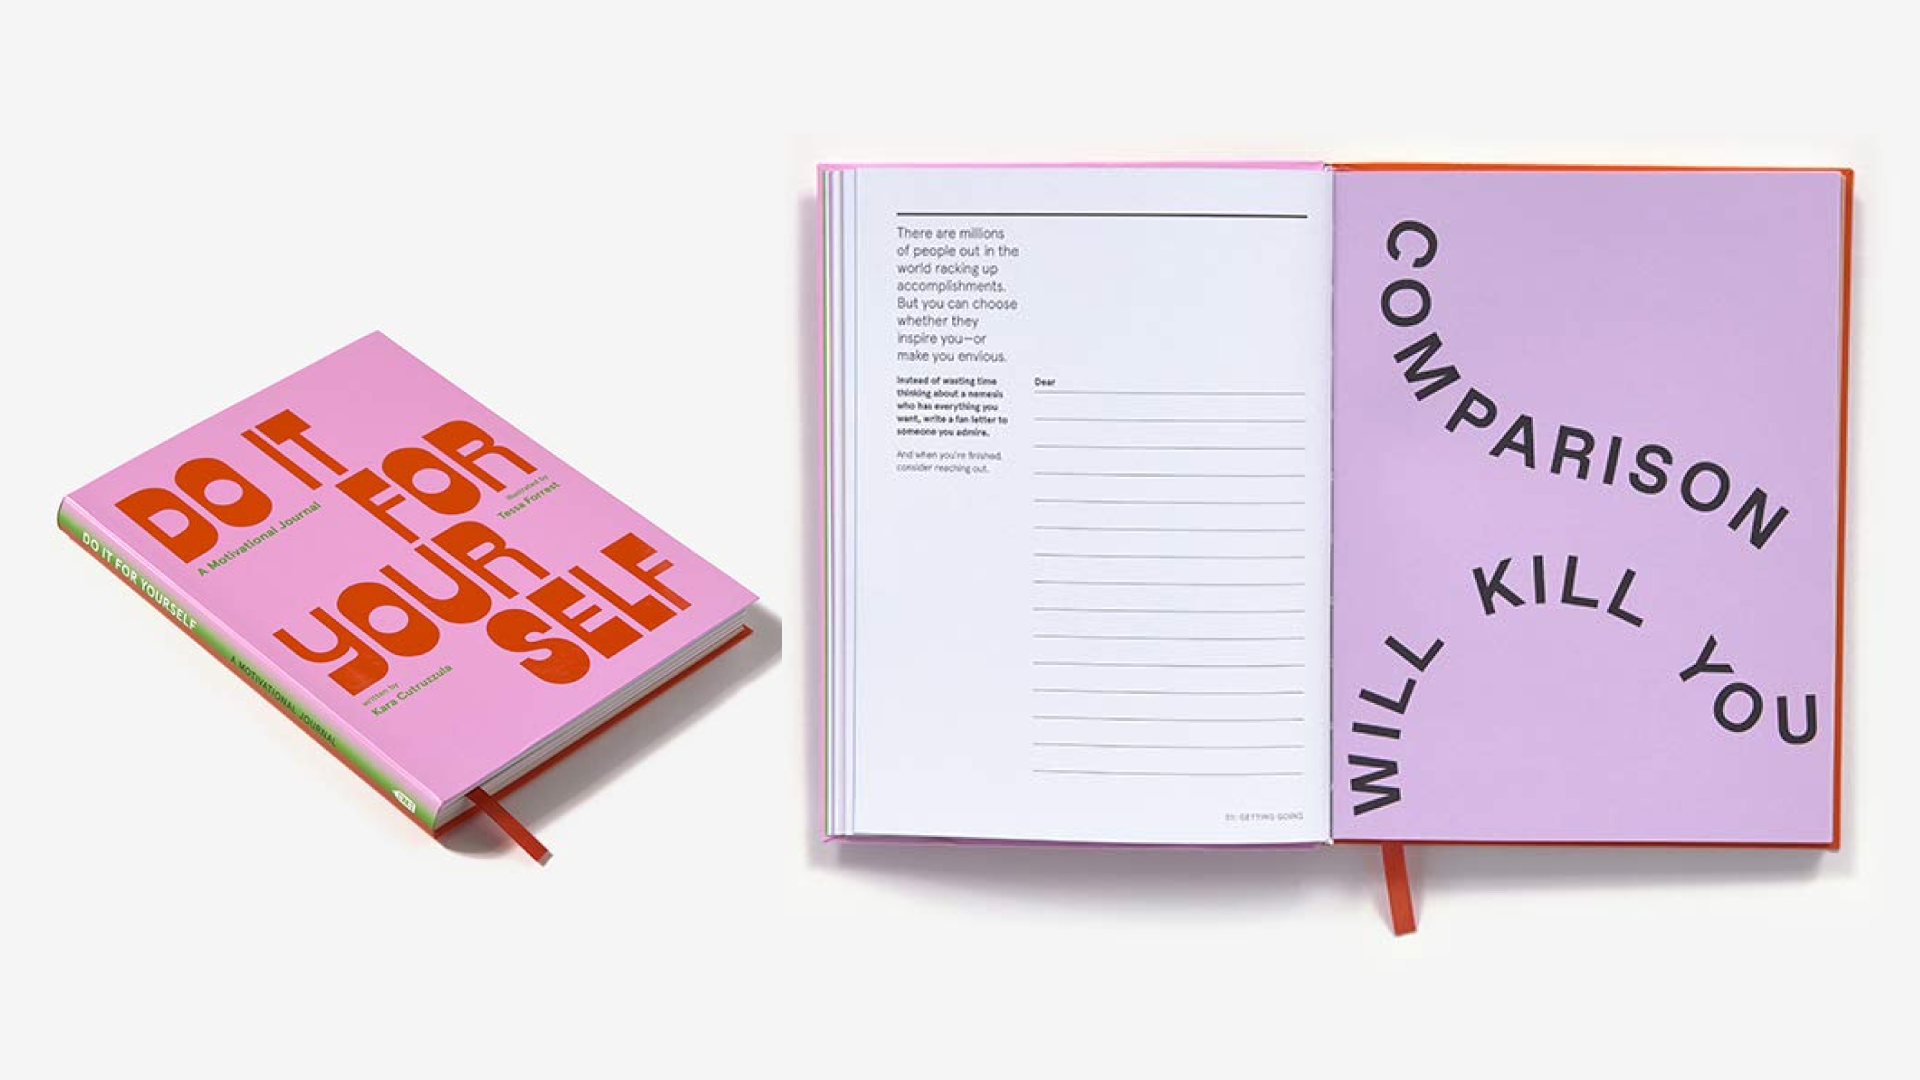 On the Bright Side Sticker Journal: A Guided Journal with Prompts, Tools, and Trackers to Help You Become Your Best Self [Book]